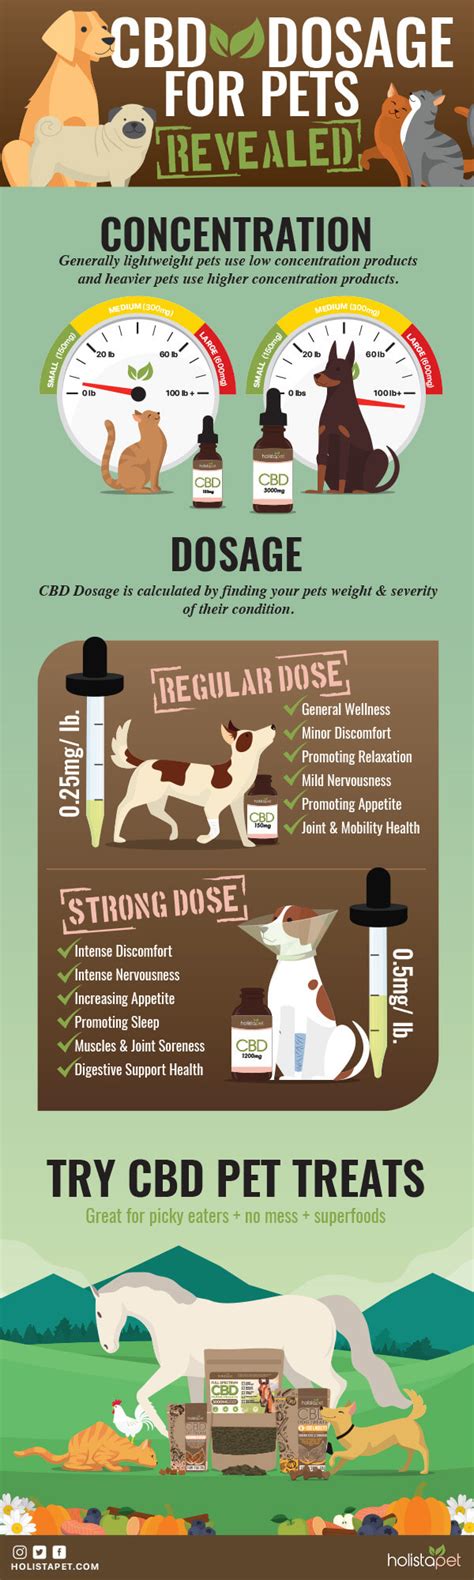 Cbd Dosage For Cancer In Dogs